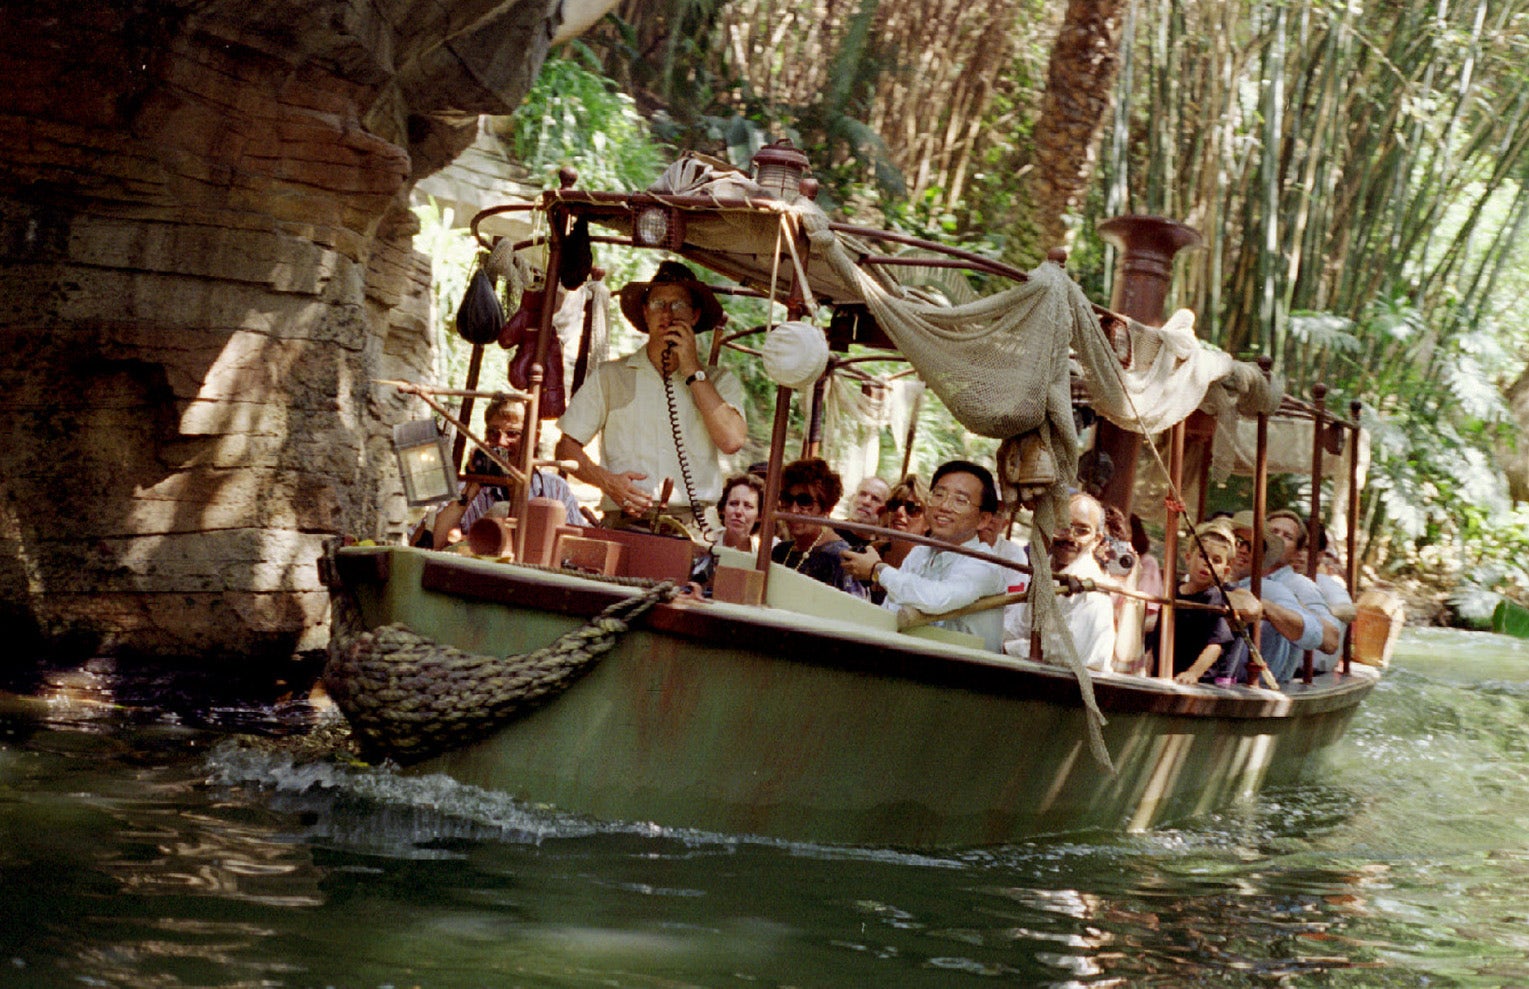 Disney will redesign the Jungle Cruise tour at theme parks and remove “negative representations” of indigenous peoples